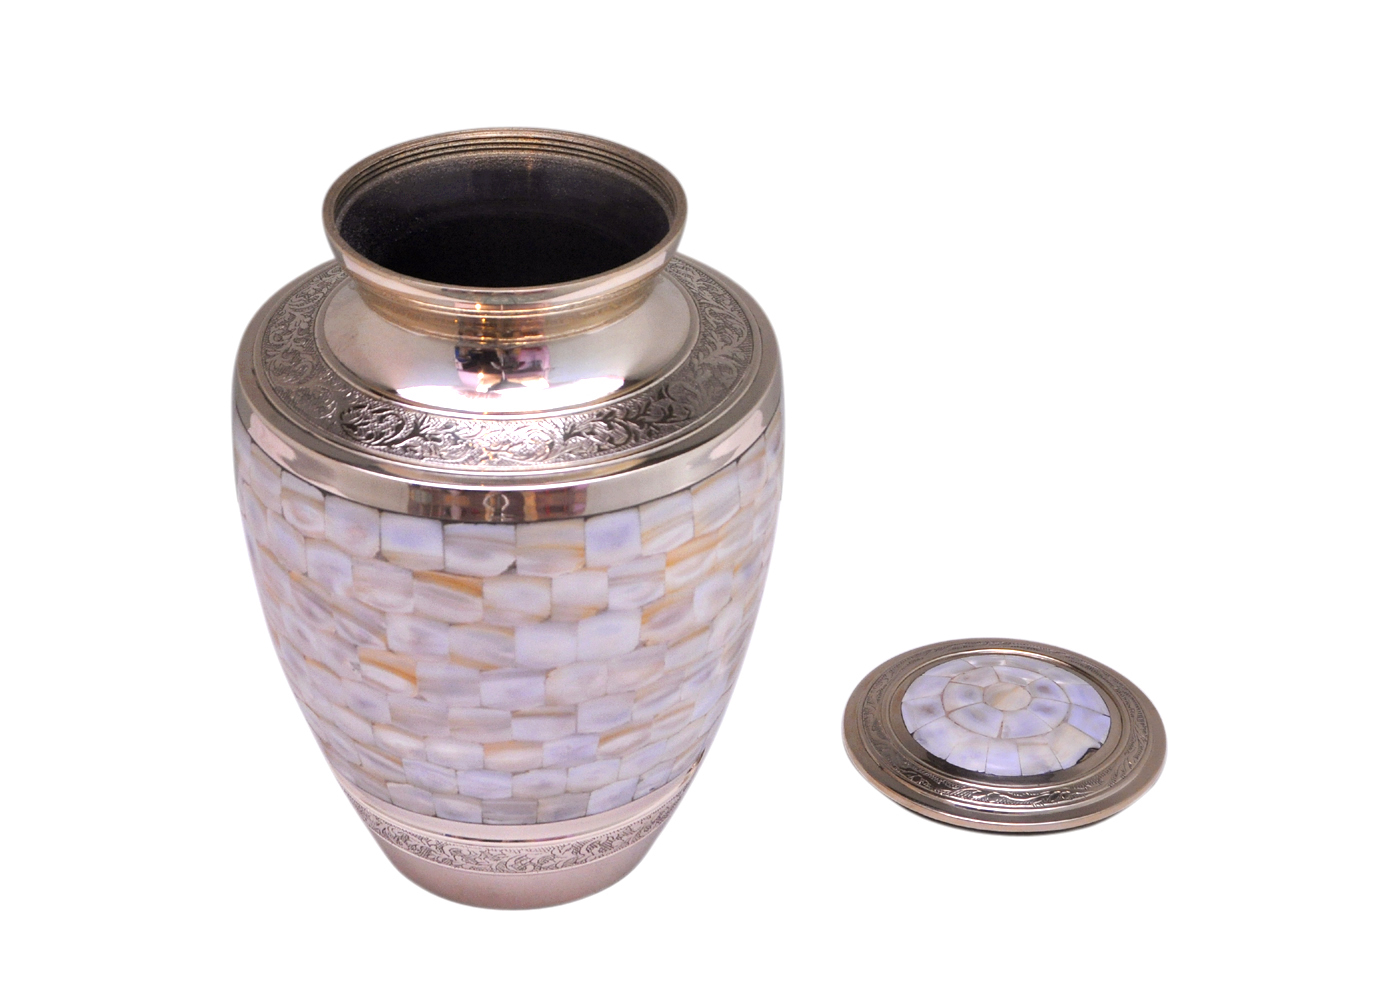 Large/Adult 200 Cubic Inch Regal Mother of Pearl Brass Funeral Cremation Urn 